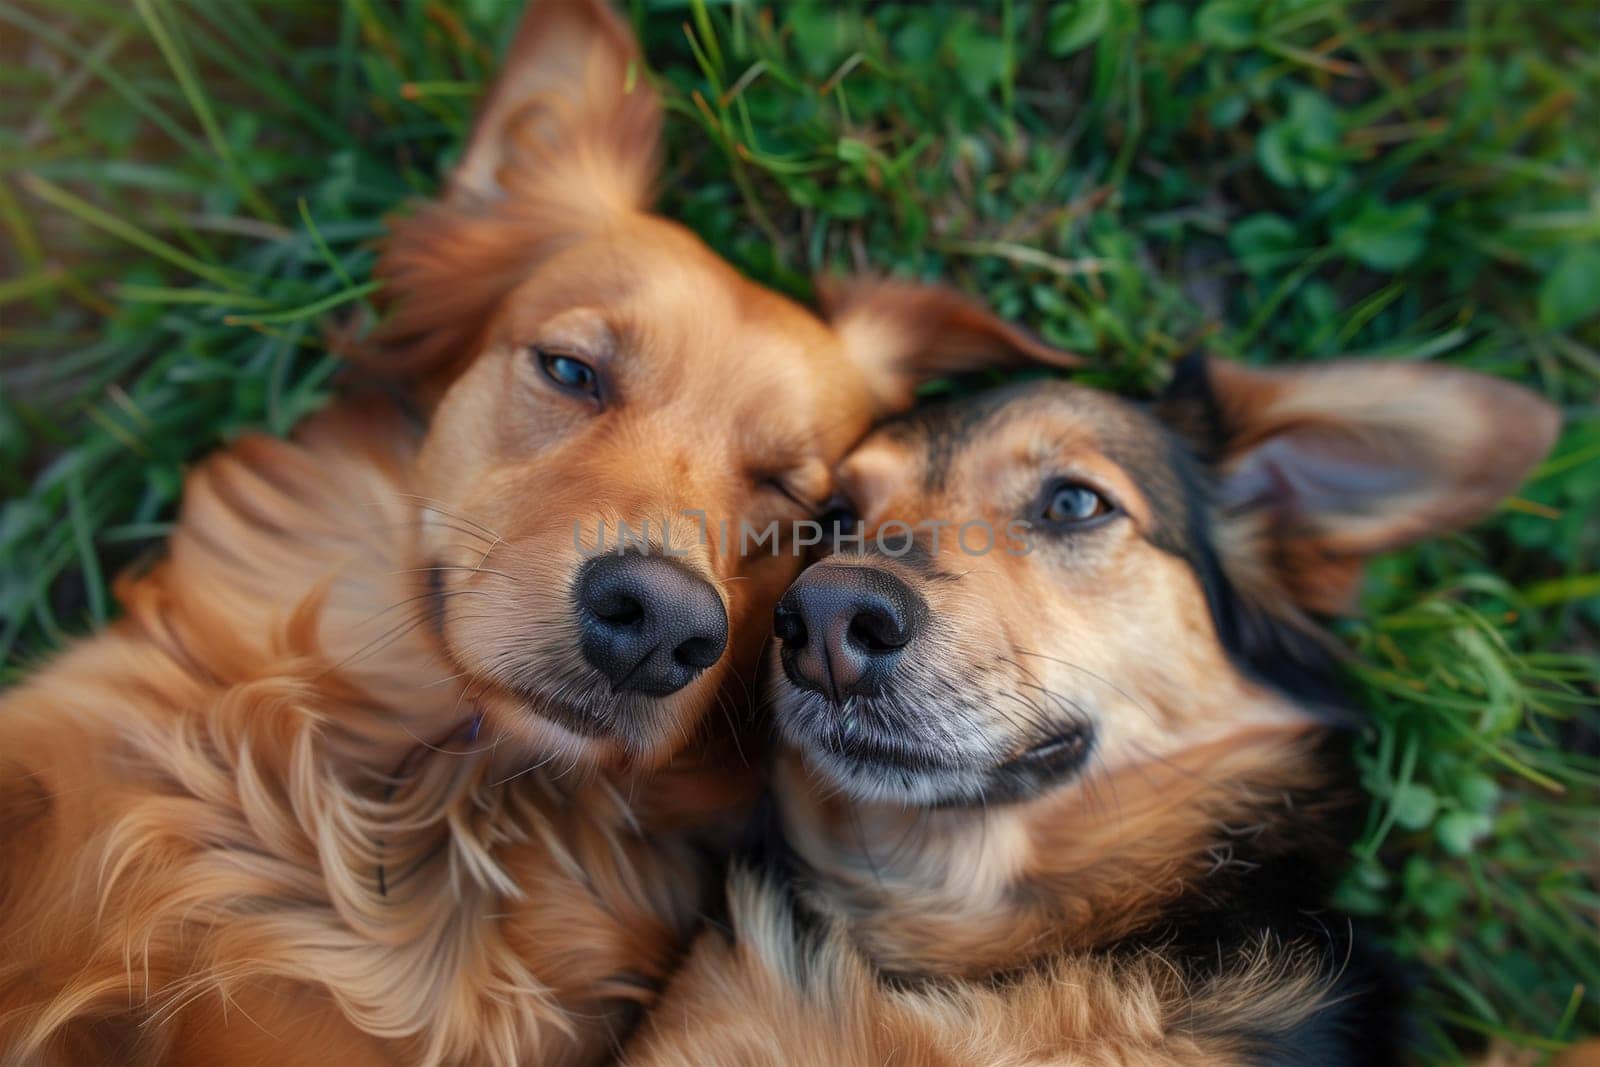 Two dogs cuddling closely, one resting its head on the other, with a backdrop of lush grass.